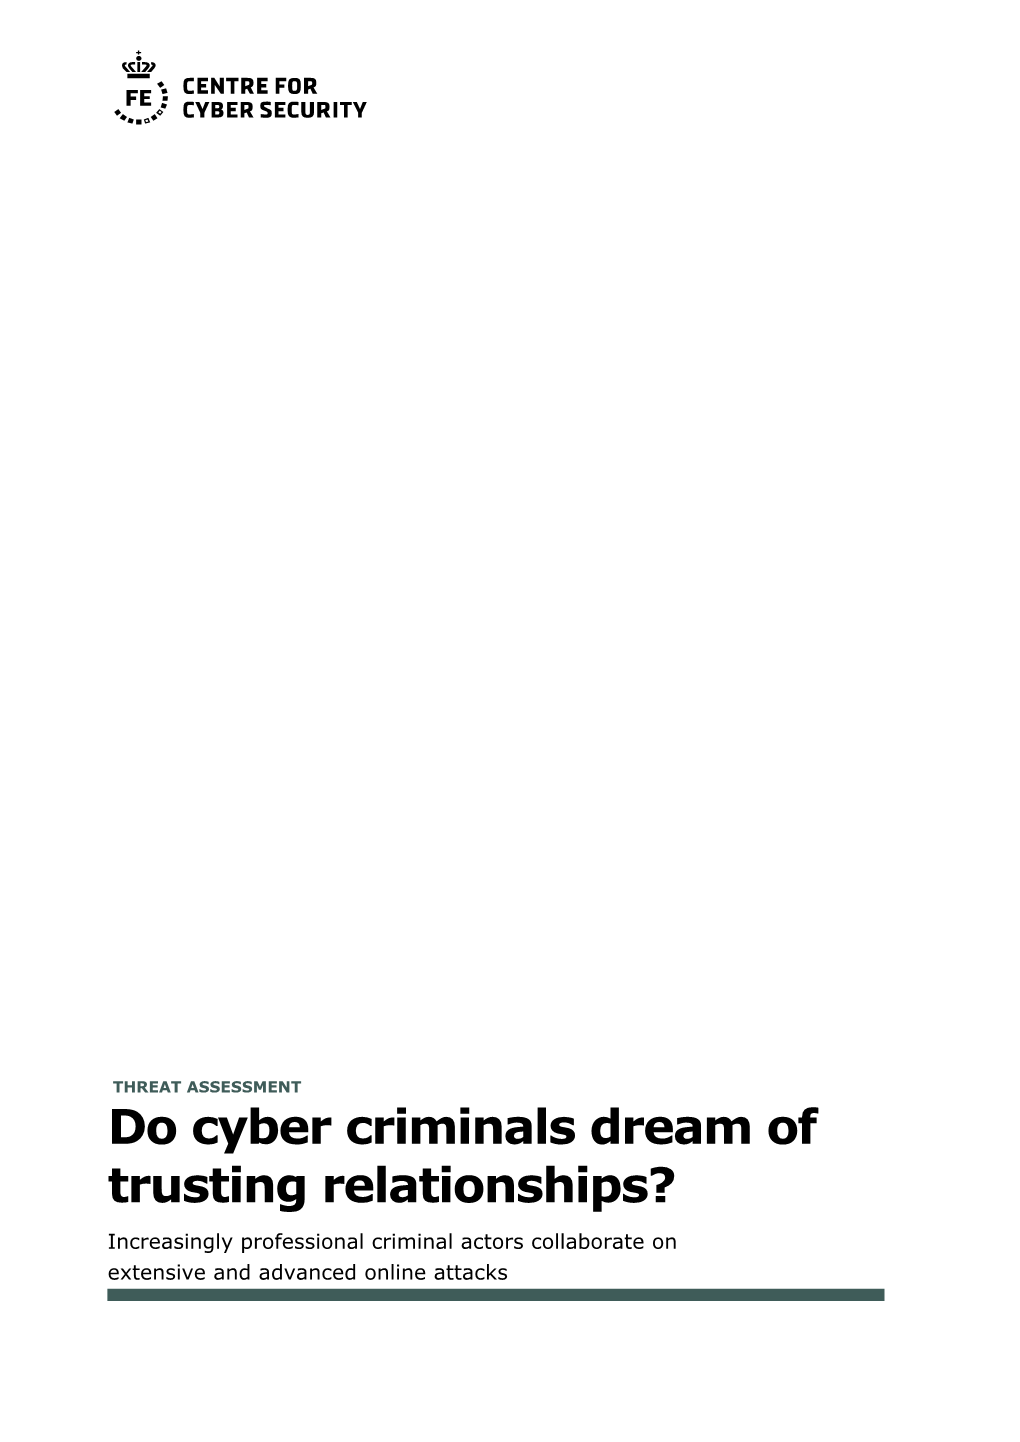 Do Cyber Criminals Dream of Trusting Relationships? Increasingly Professional Criminal Actors Collaborate on Extensive and Advanced Online Attacks